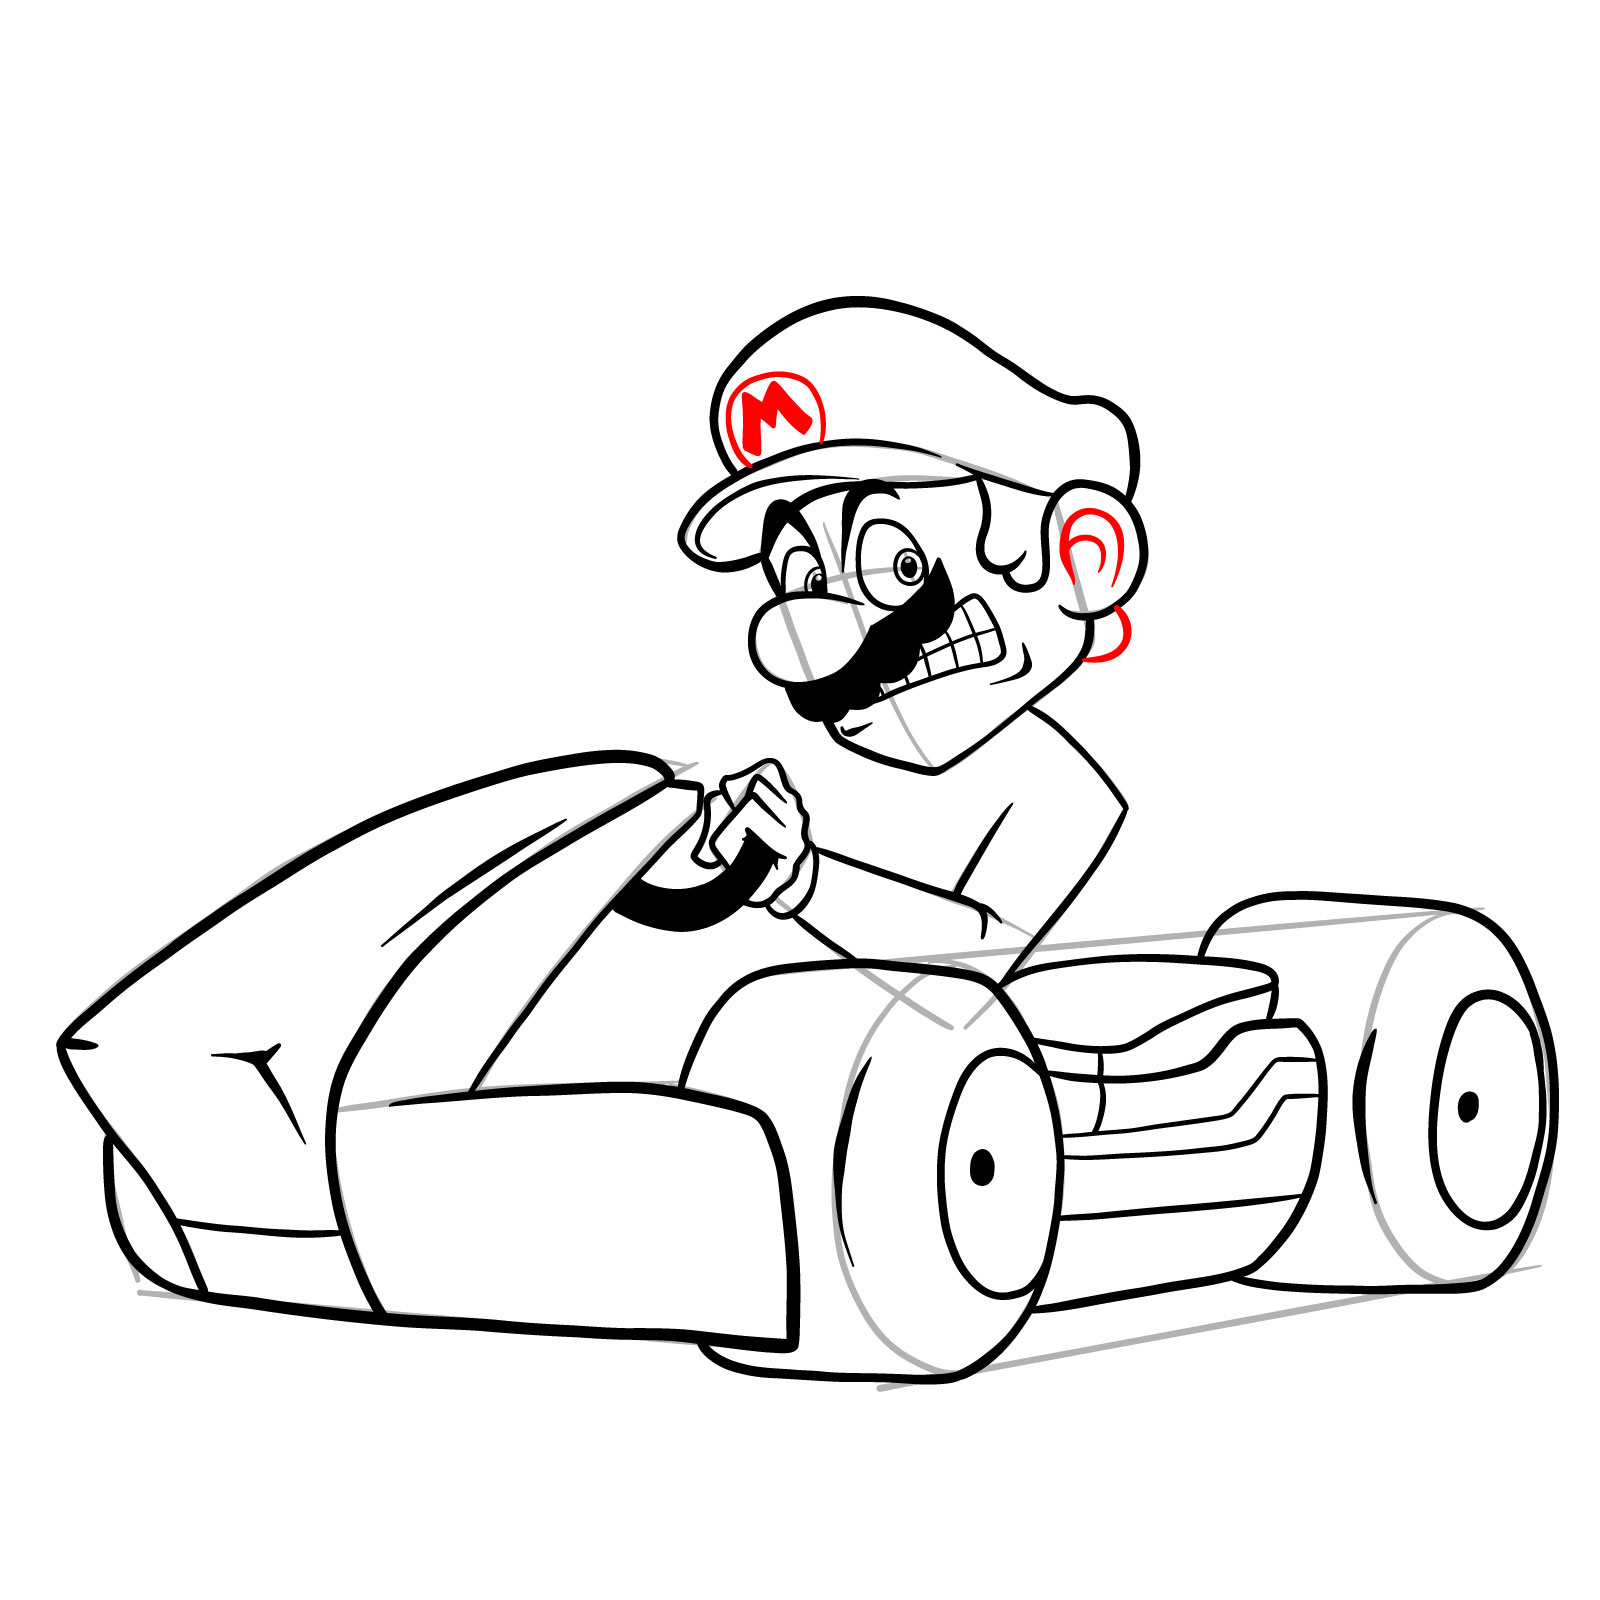 How to draw Race Traitors Mario - step 31